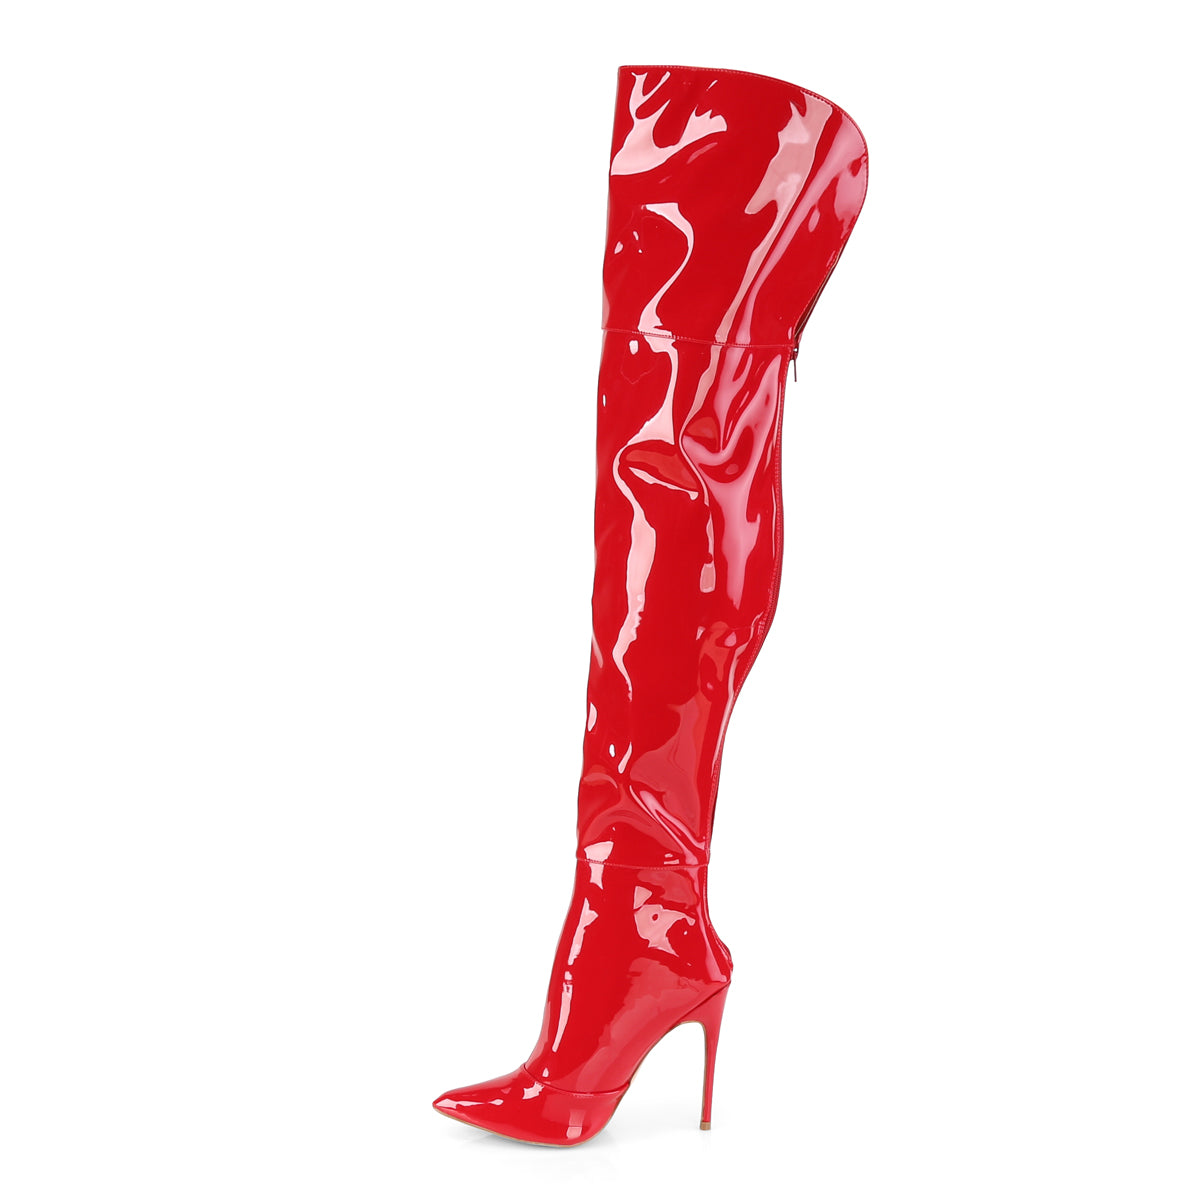 COURTLY-3012 Pleaser 5 Inch Heel Red Fetish Footwear-Pleaser- Sexy Shoes Pole Dance Heels